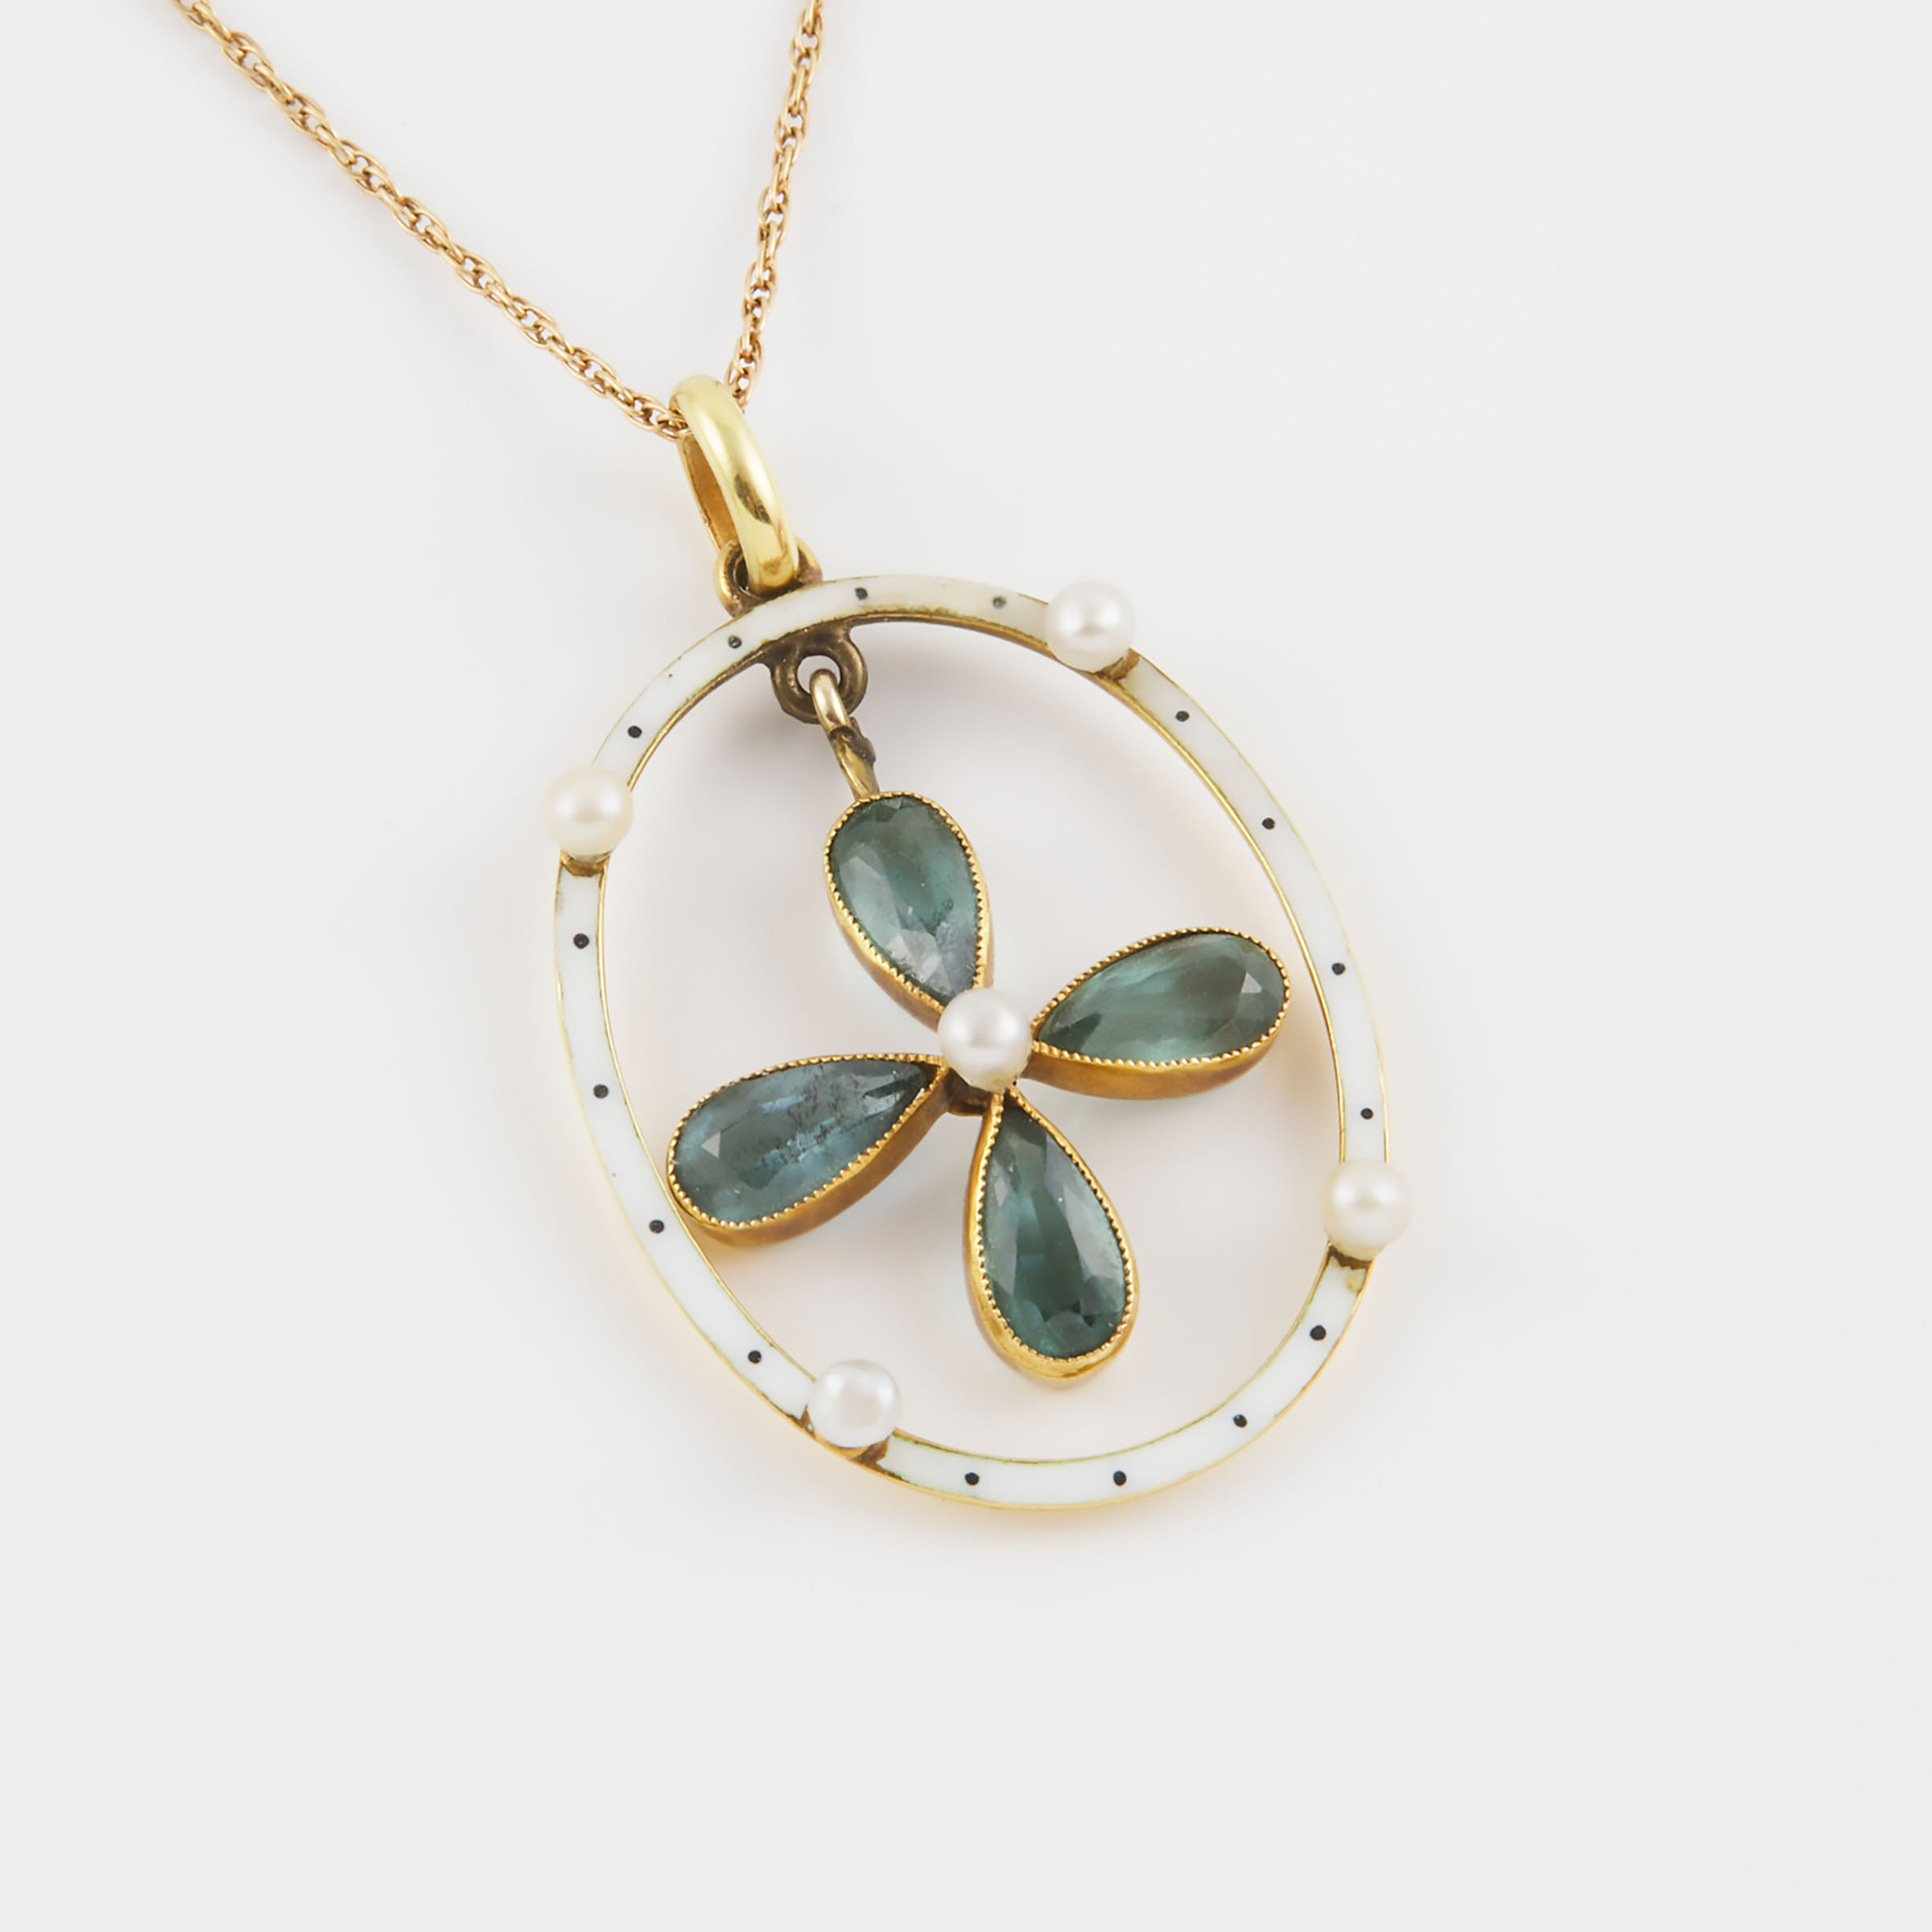 15k Yellow Gold And Enamelled Pendant